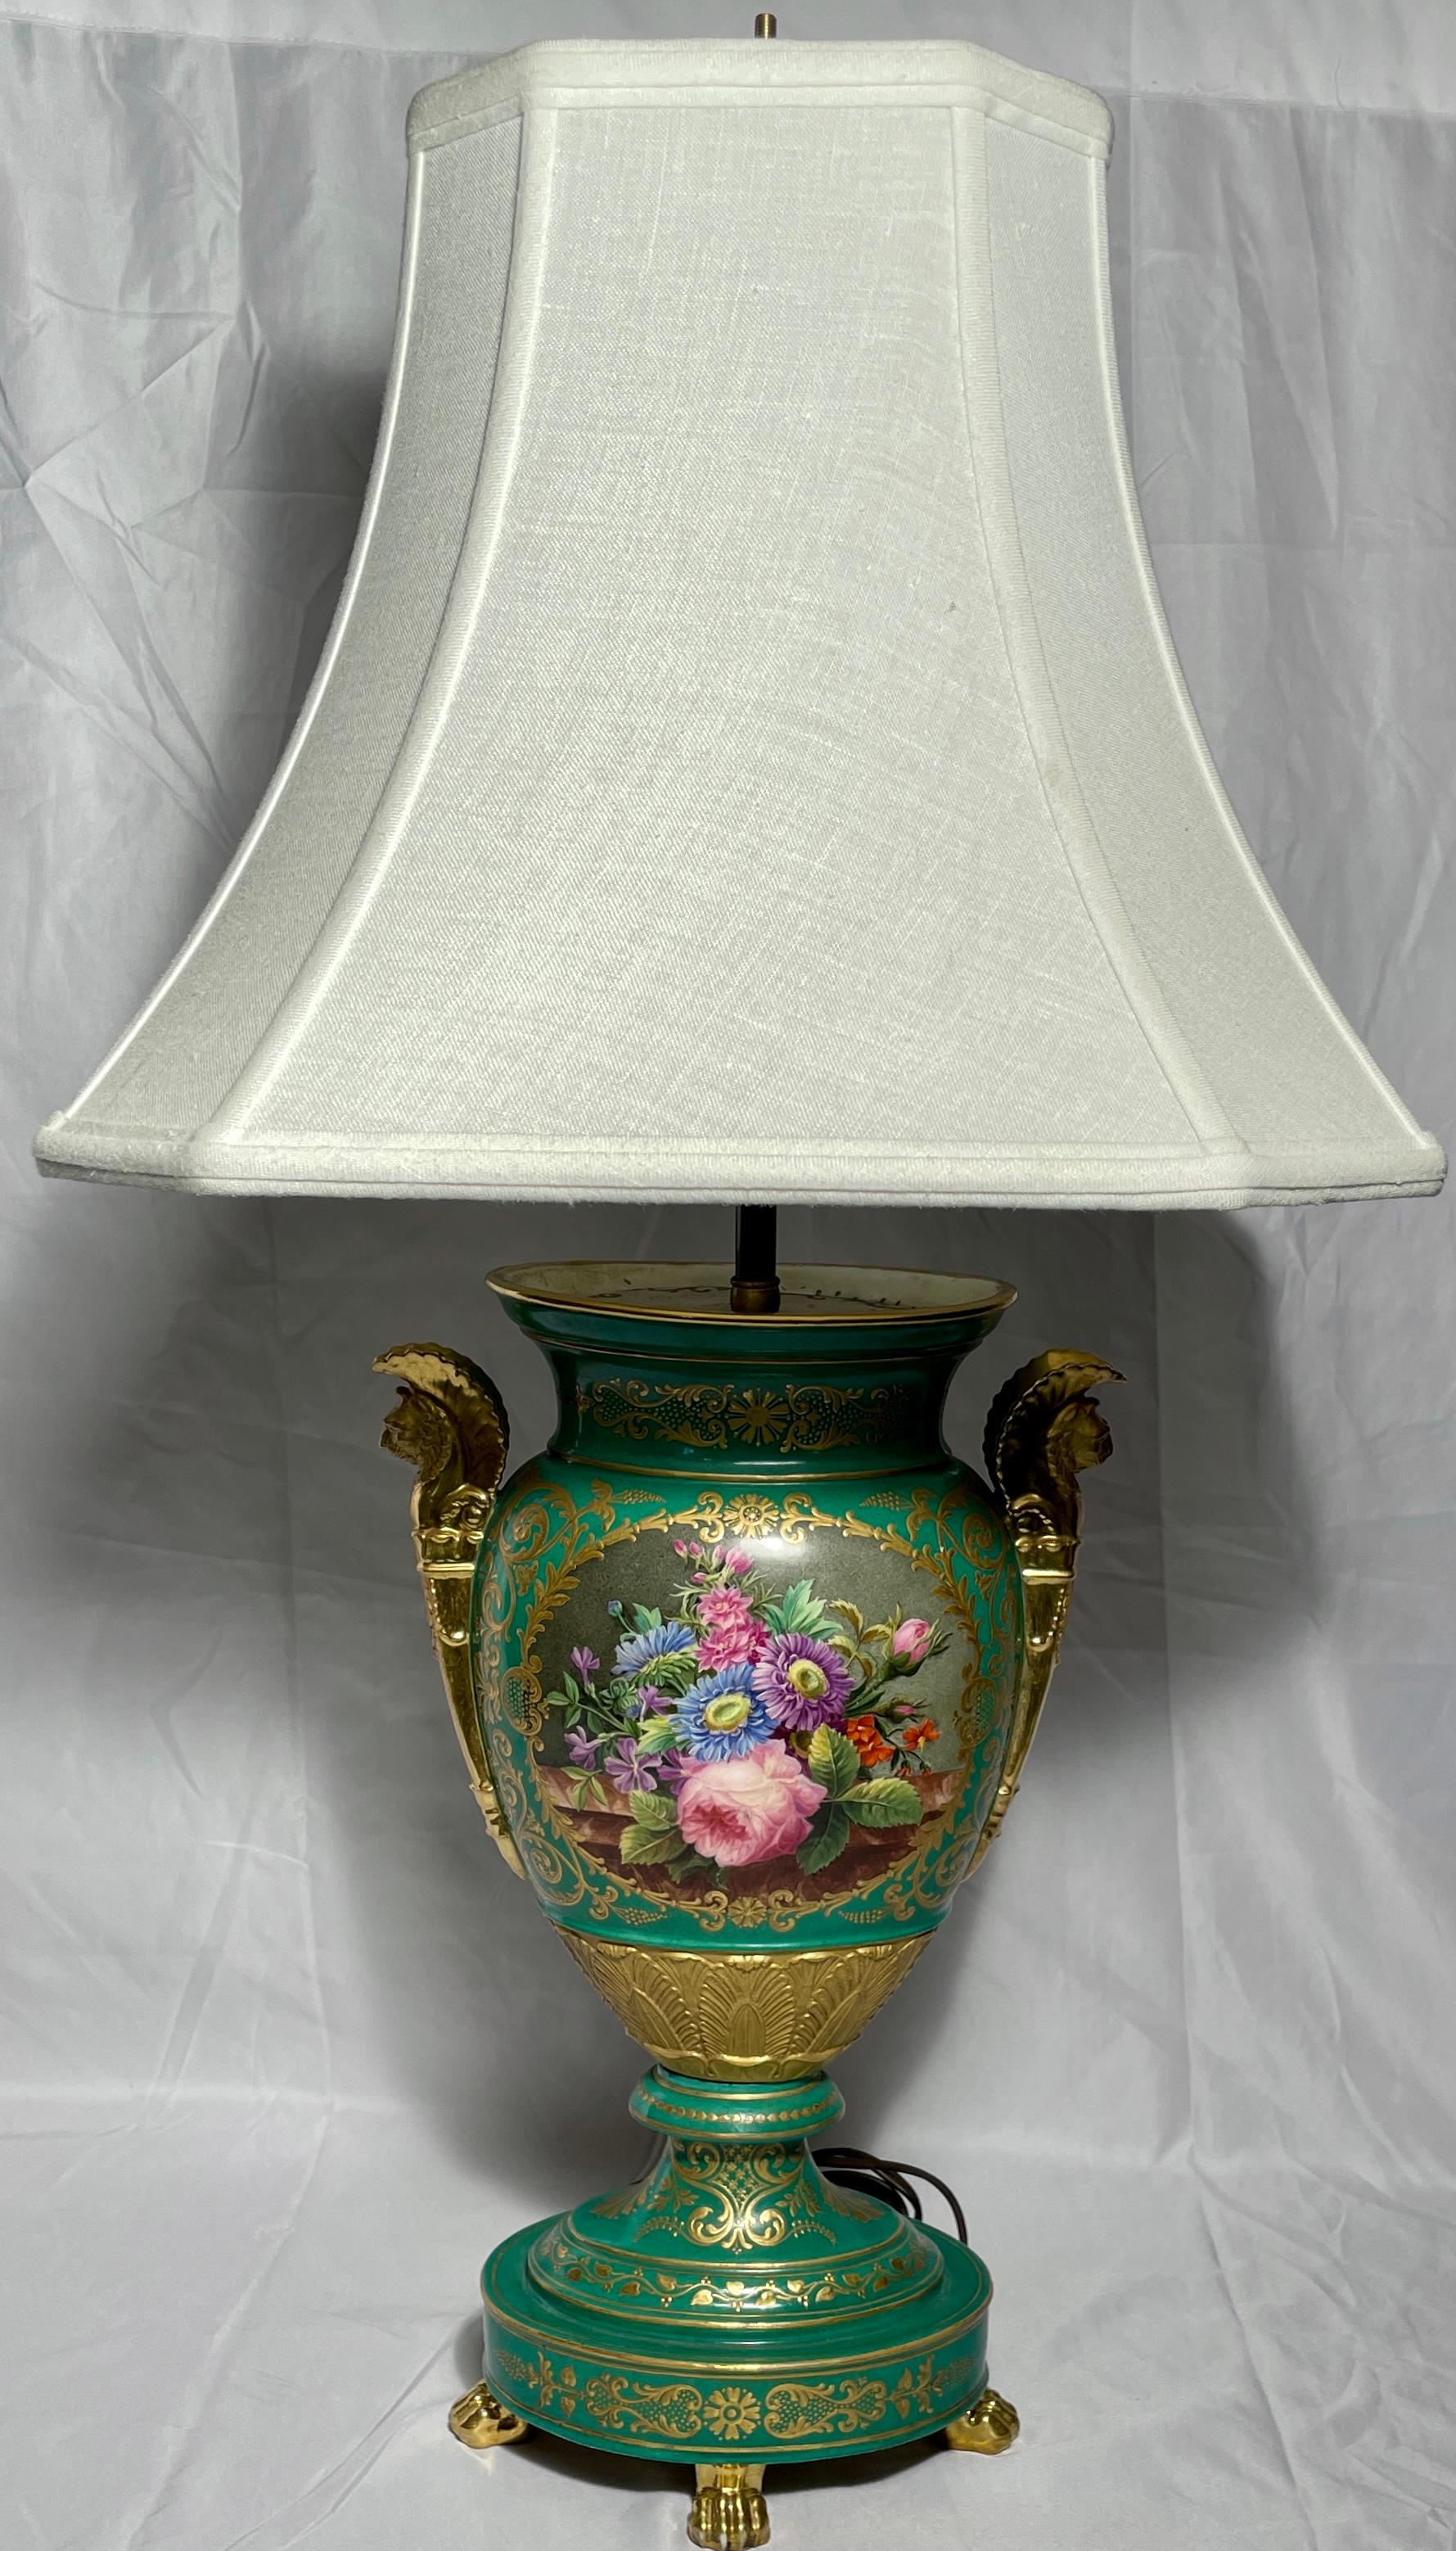 Antique 19th Century French Green and Gold Painted Porcelain Lamp, Circa 1860 In Good Condition For Sale In New Orleans, LA